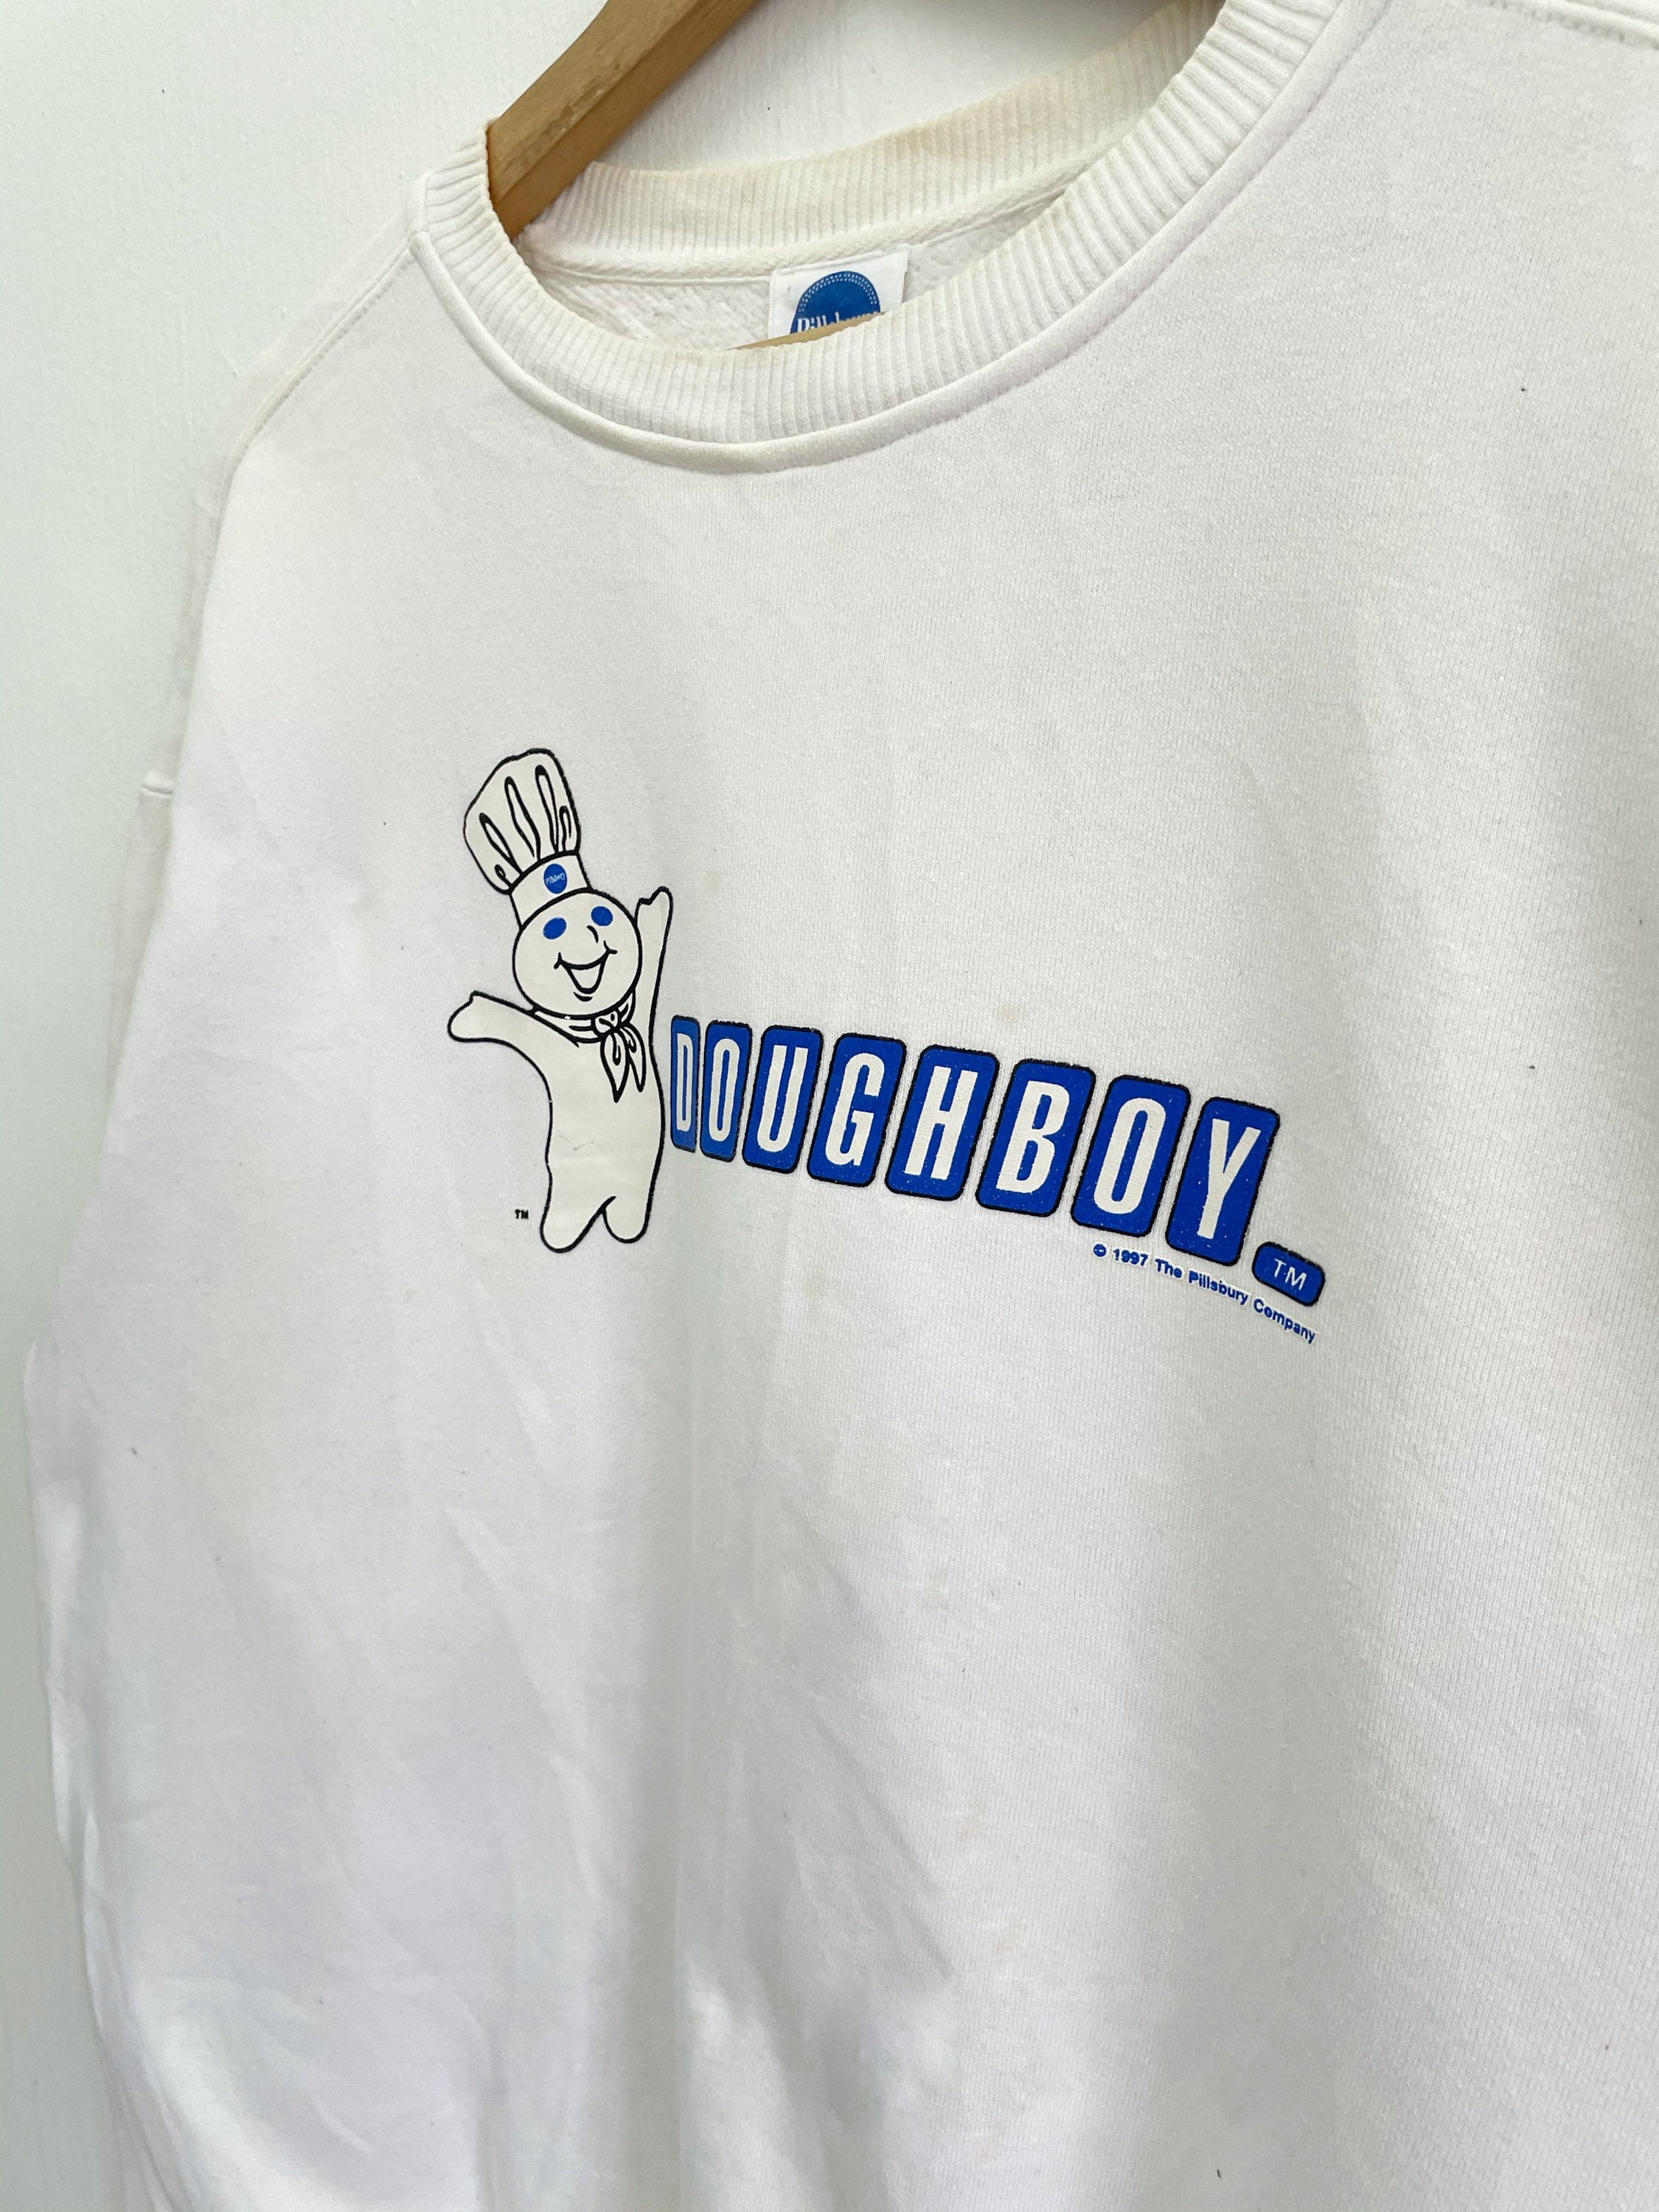 PICK Vintage 90s 1997 Doughboy Sweater Pullover Doughboy | Etsy